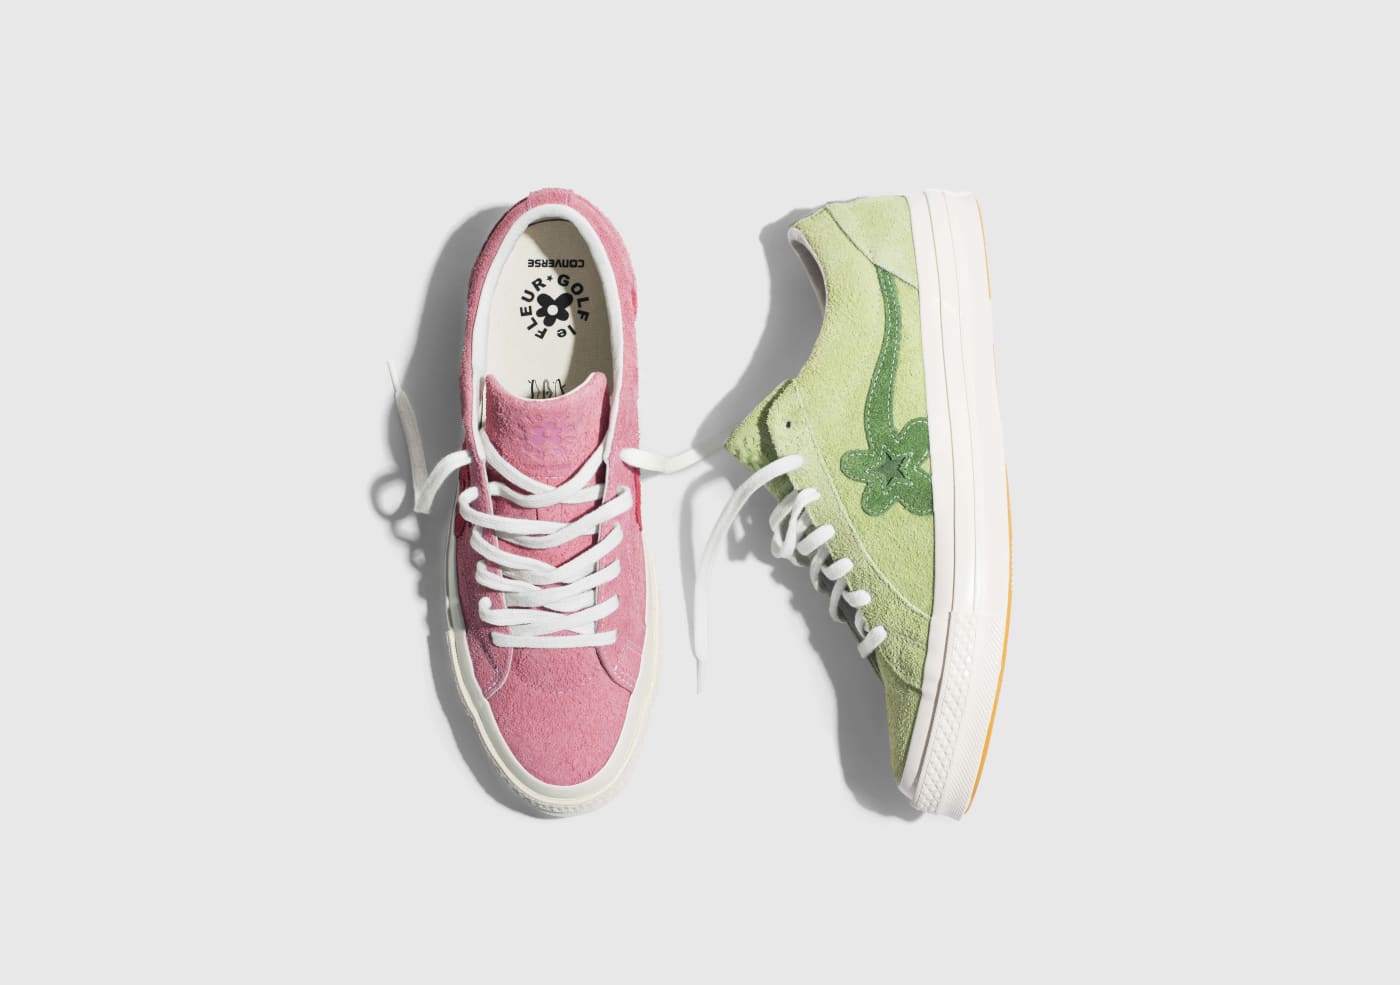 Tyler, the Creator Offers a Take on 2018 with the Latest Golf Le Fleur Converse Collection | Complex UK